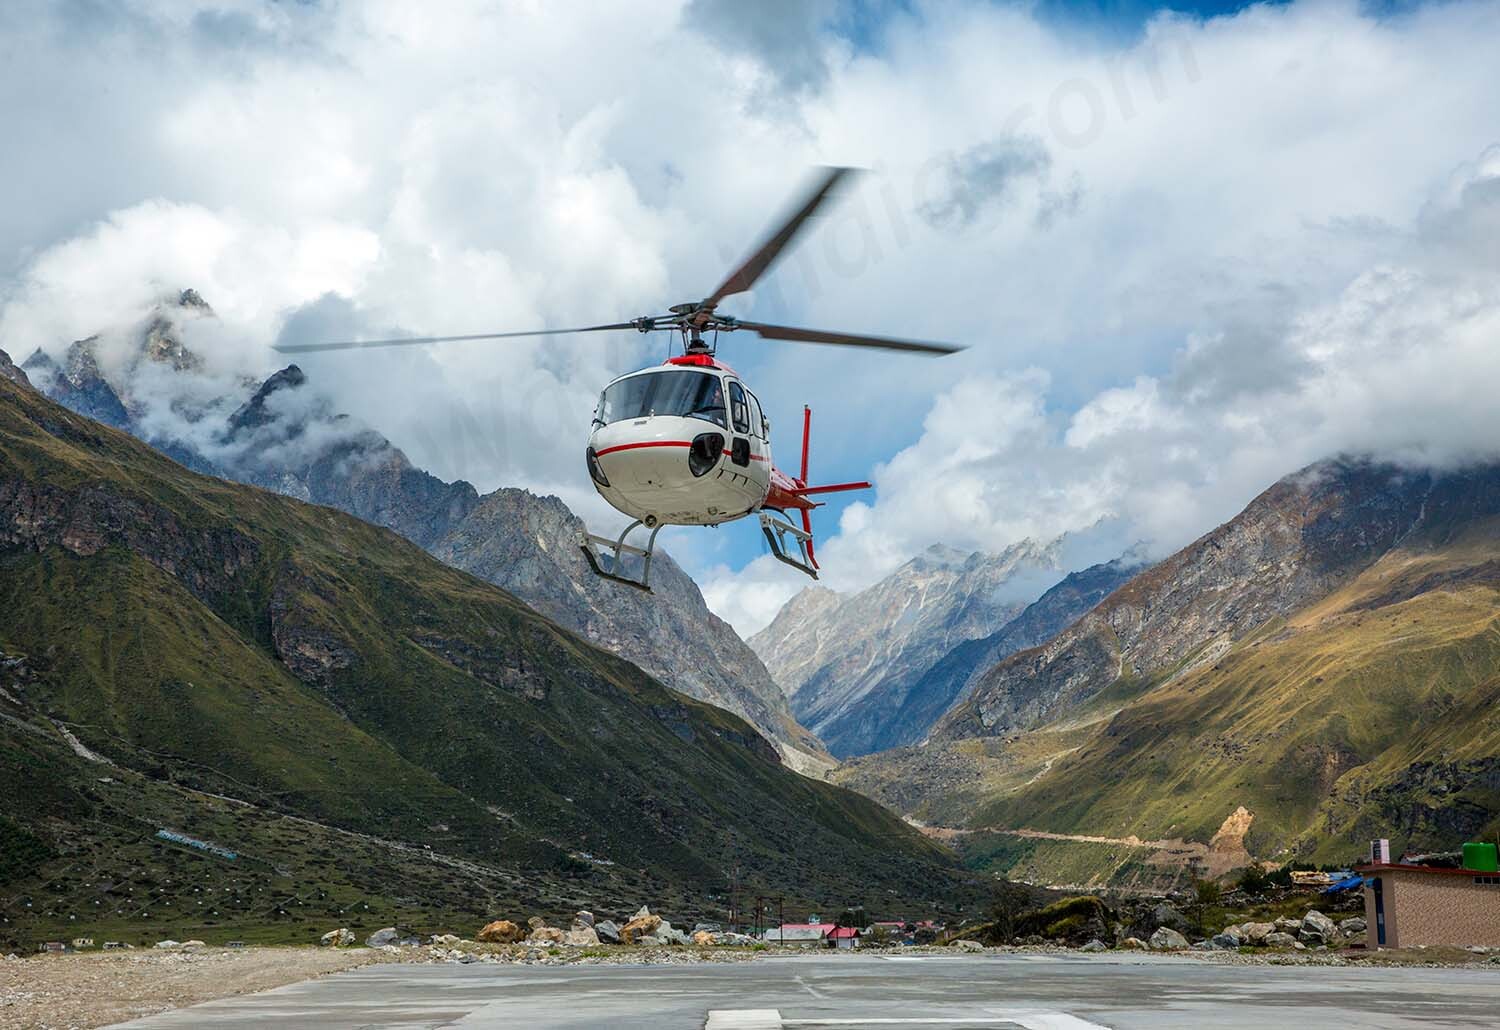 Chaardham Yatra Helicopter Service